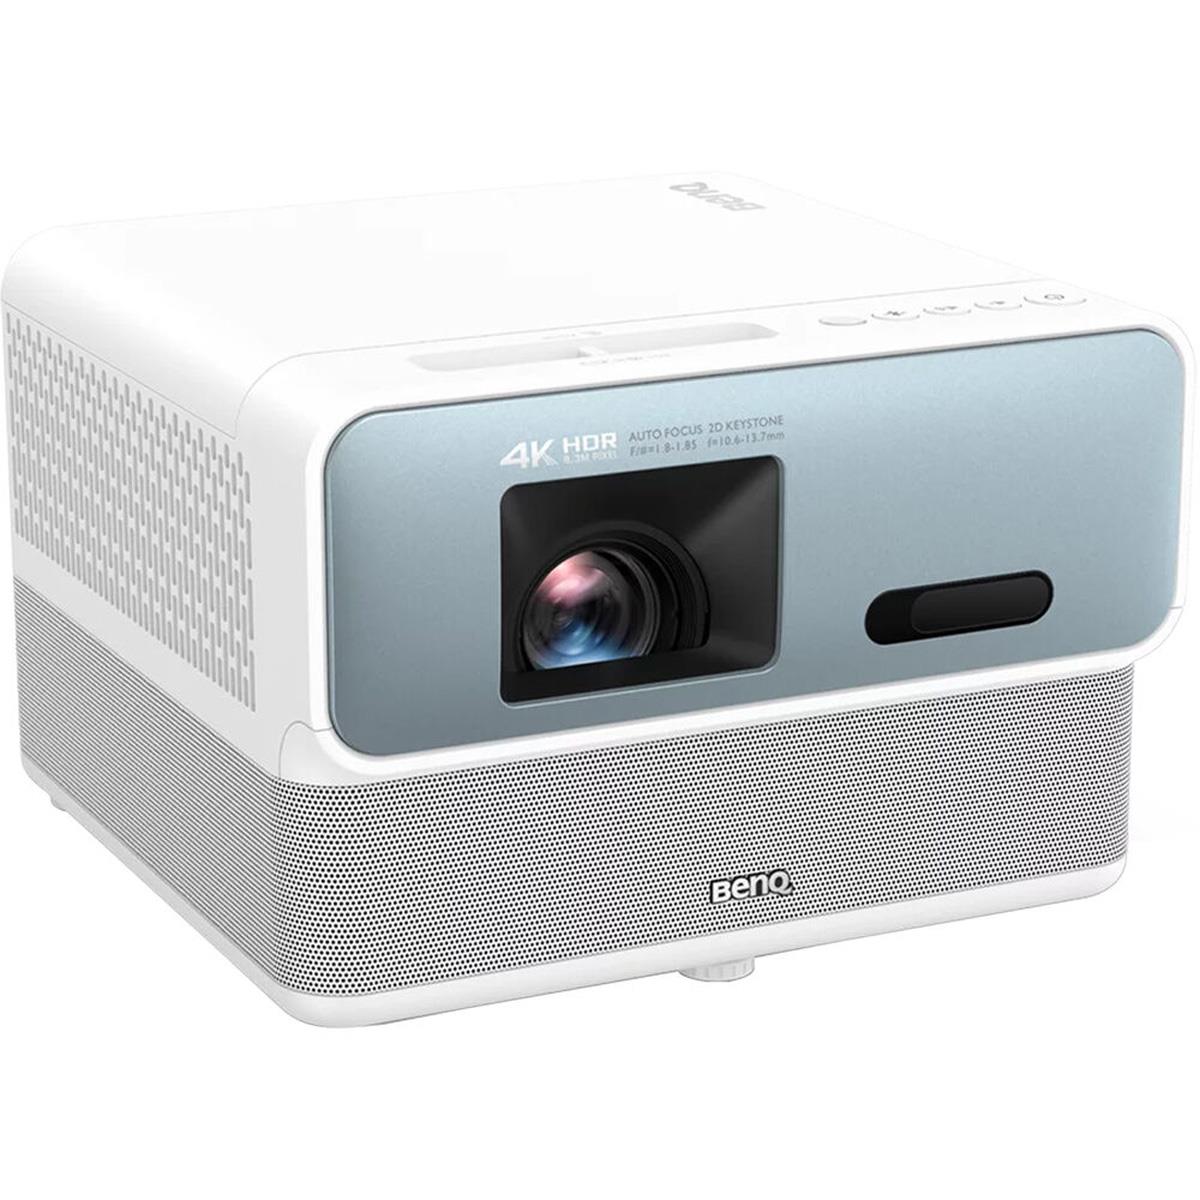 BenQ GP500 4K HDR LED Smart Home Theater Projector $849 + free s/h